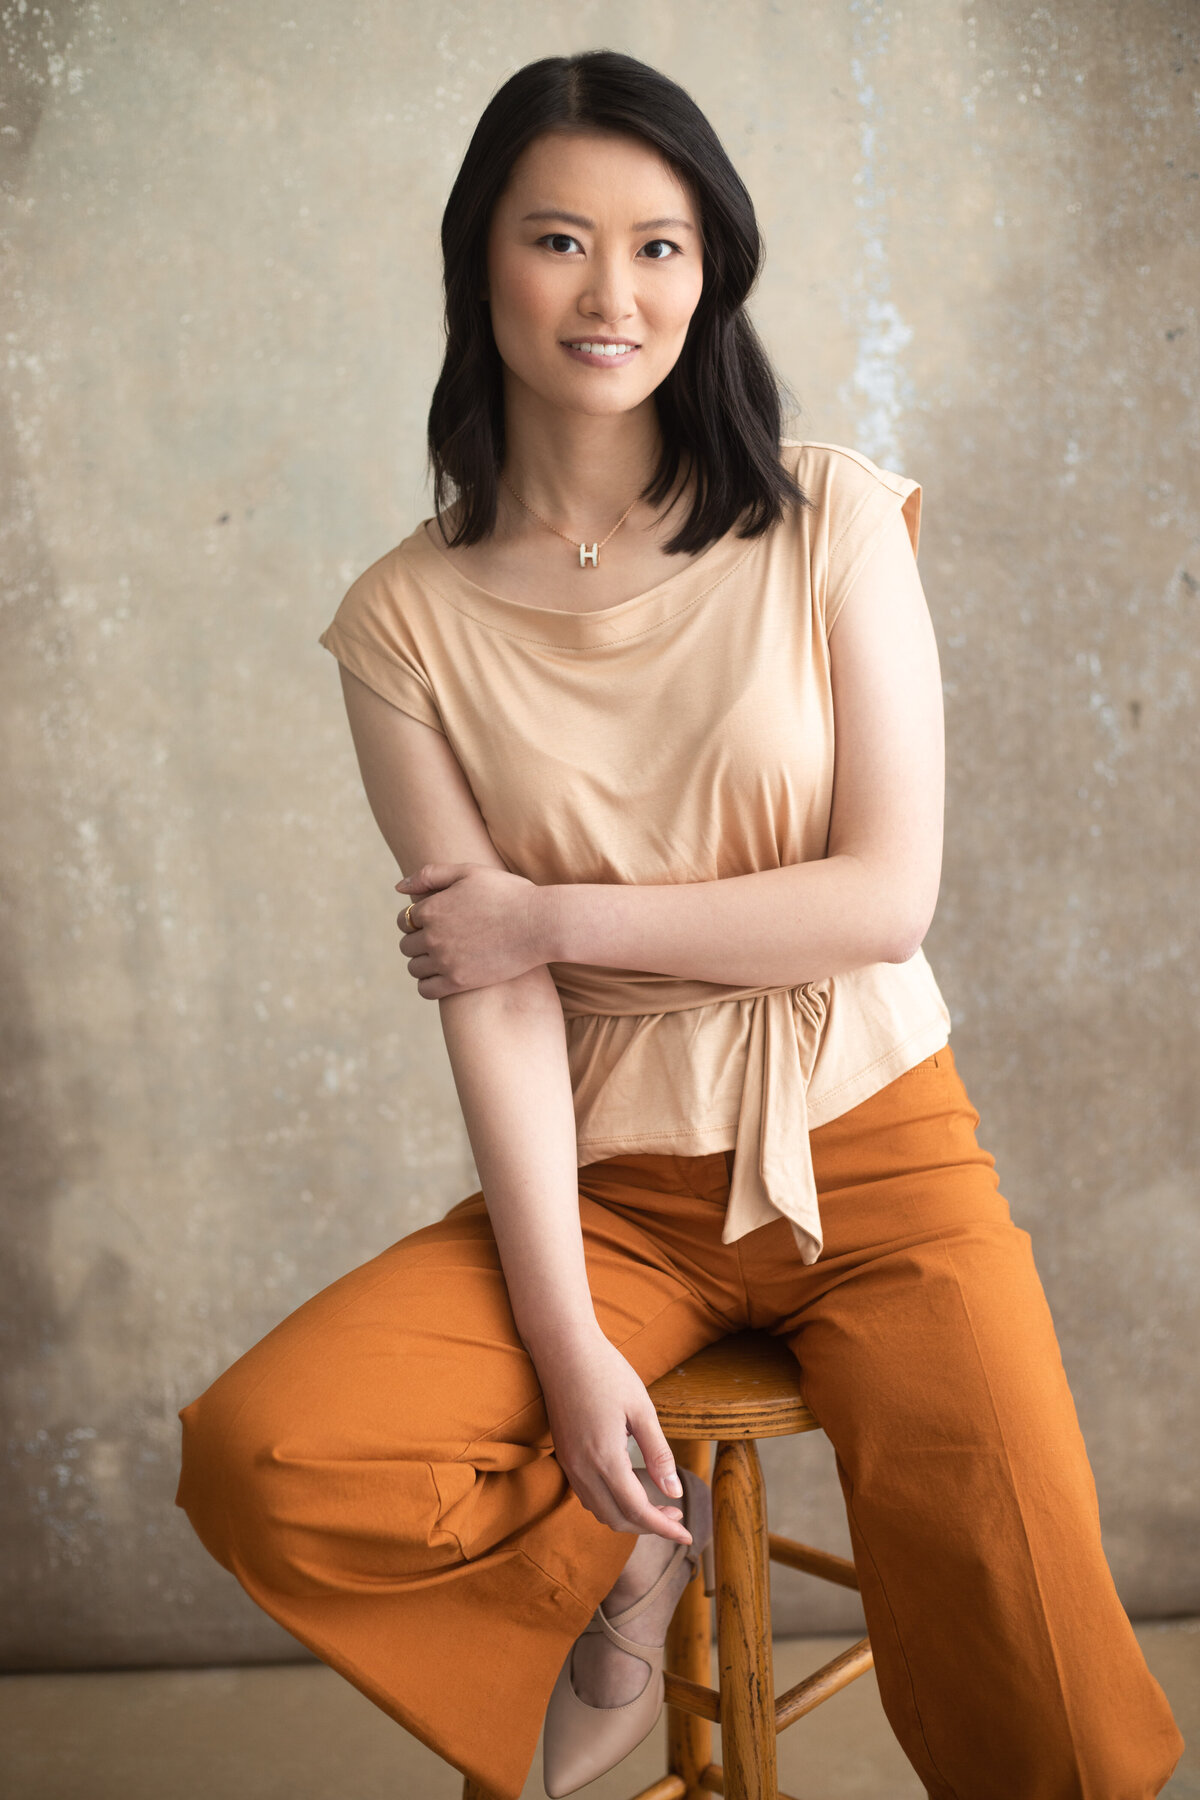 An Asian Chinese woman with orange pants and a light color shirt hold her arm and smiles for a portrait photo at Janel Lee Photography studios in Cincinnati Ohio